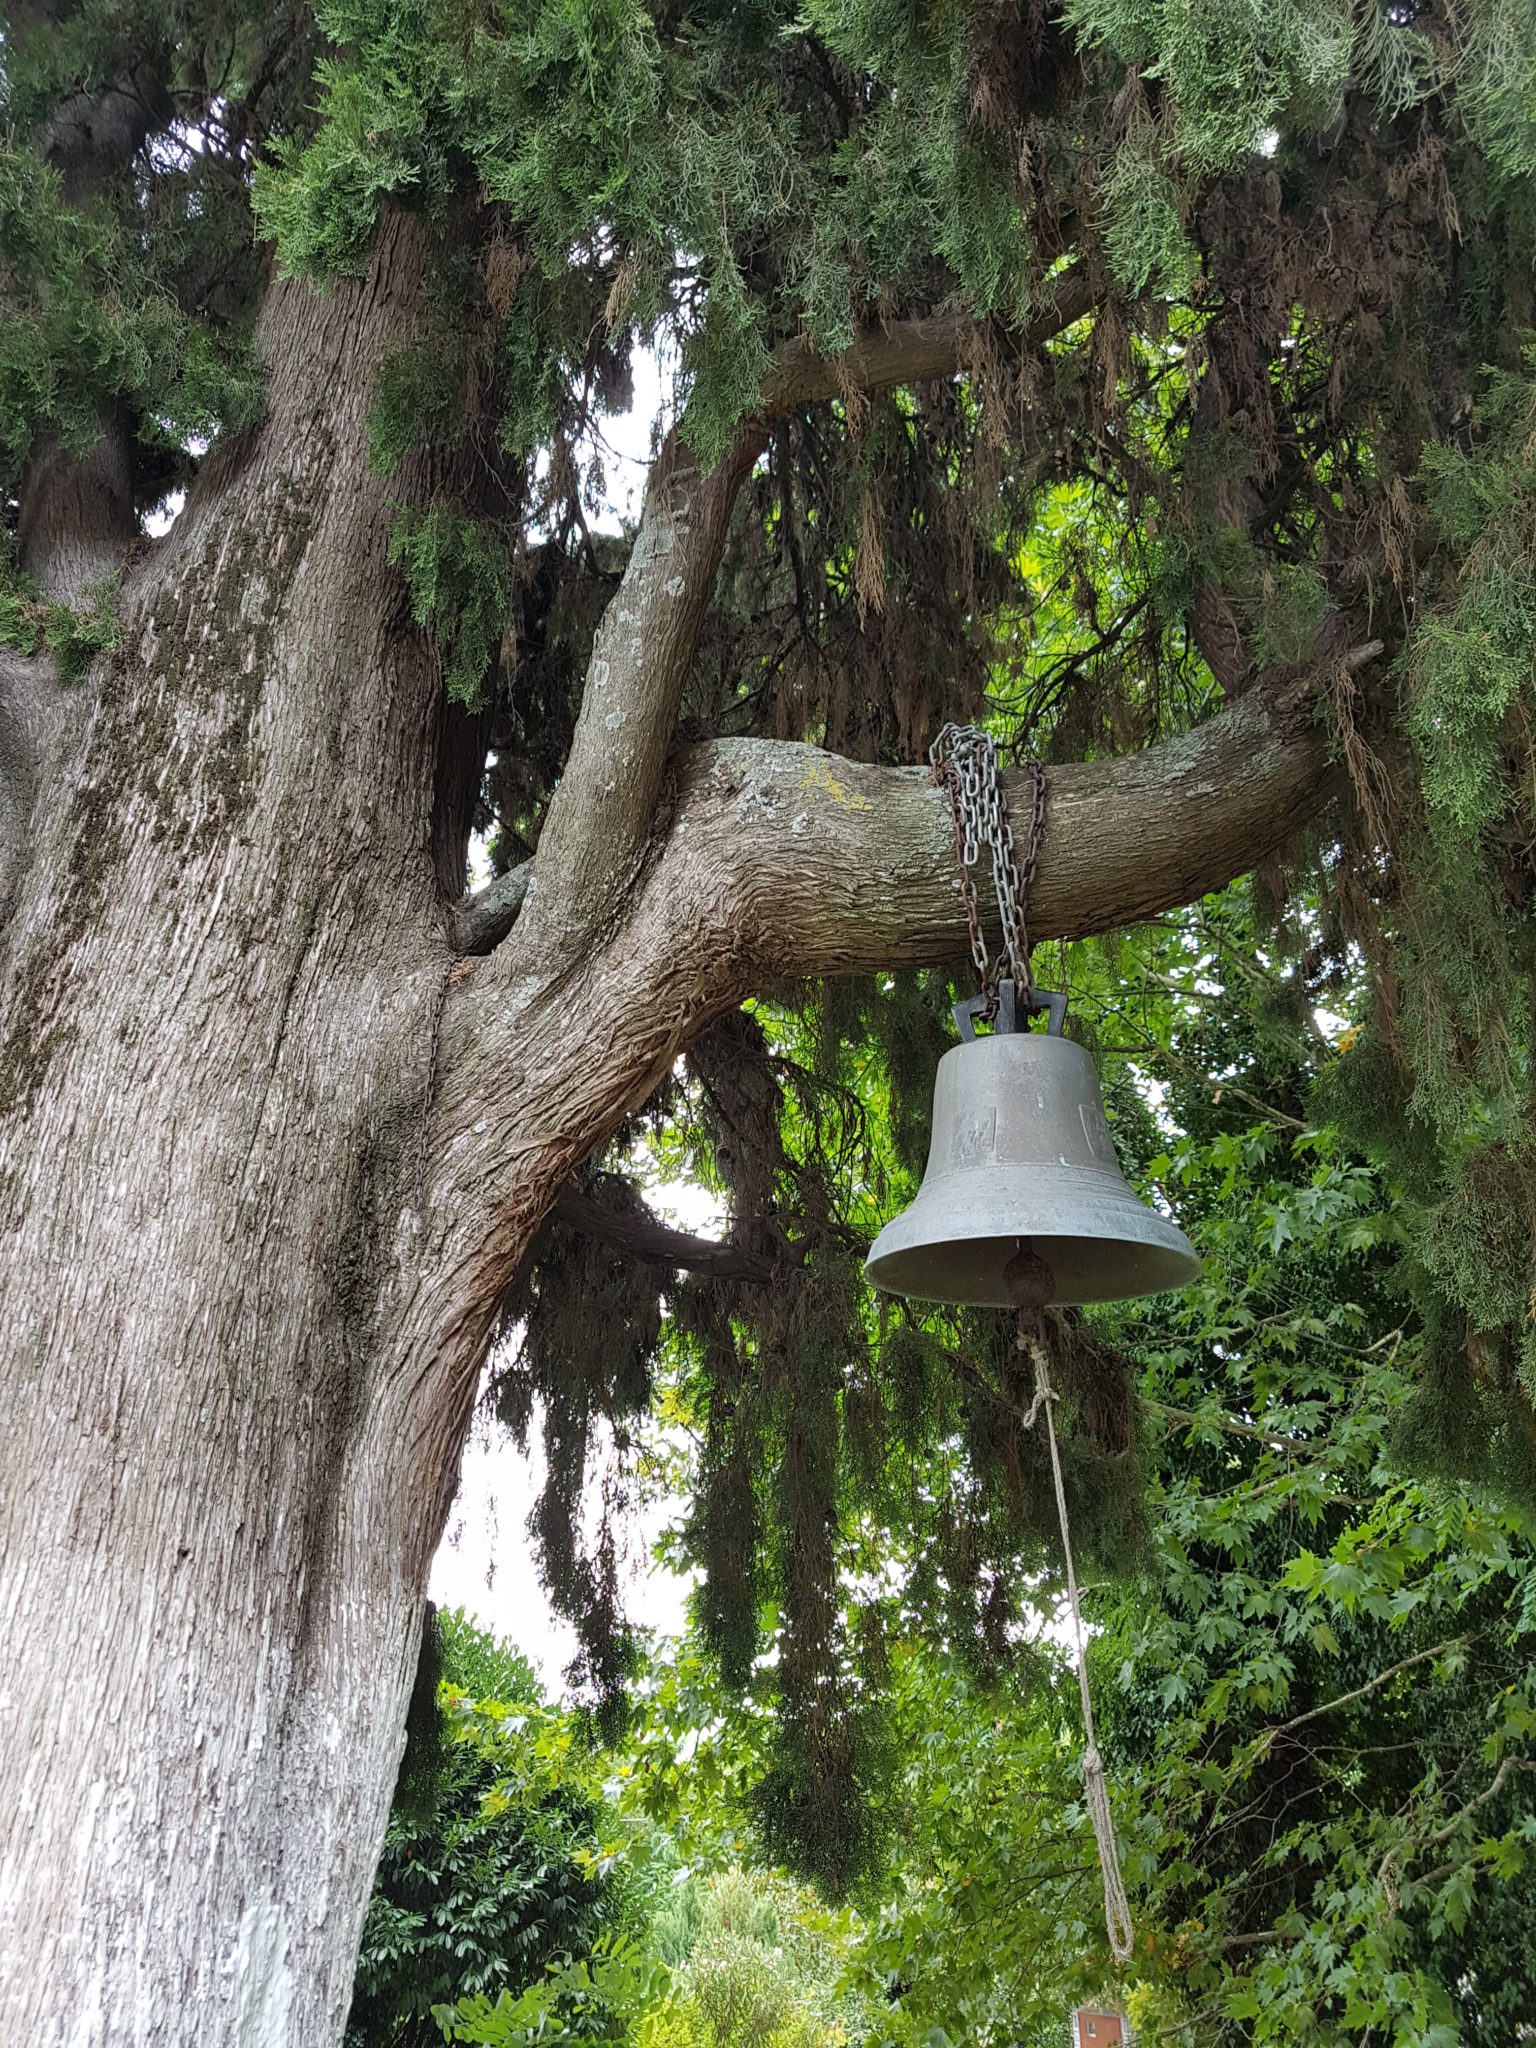 on our walk down to Papa Nero from Tsagarada we come across this bell hanging in a tree next to a sweet little church, the temptation is to ring it!